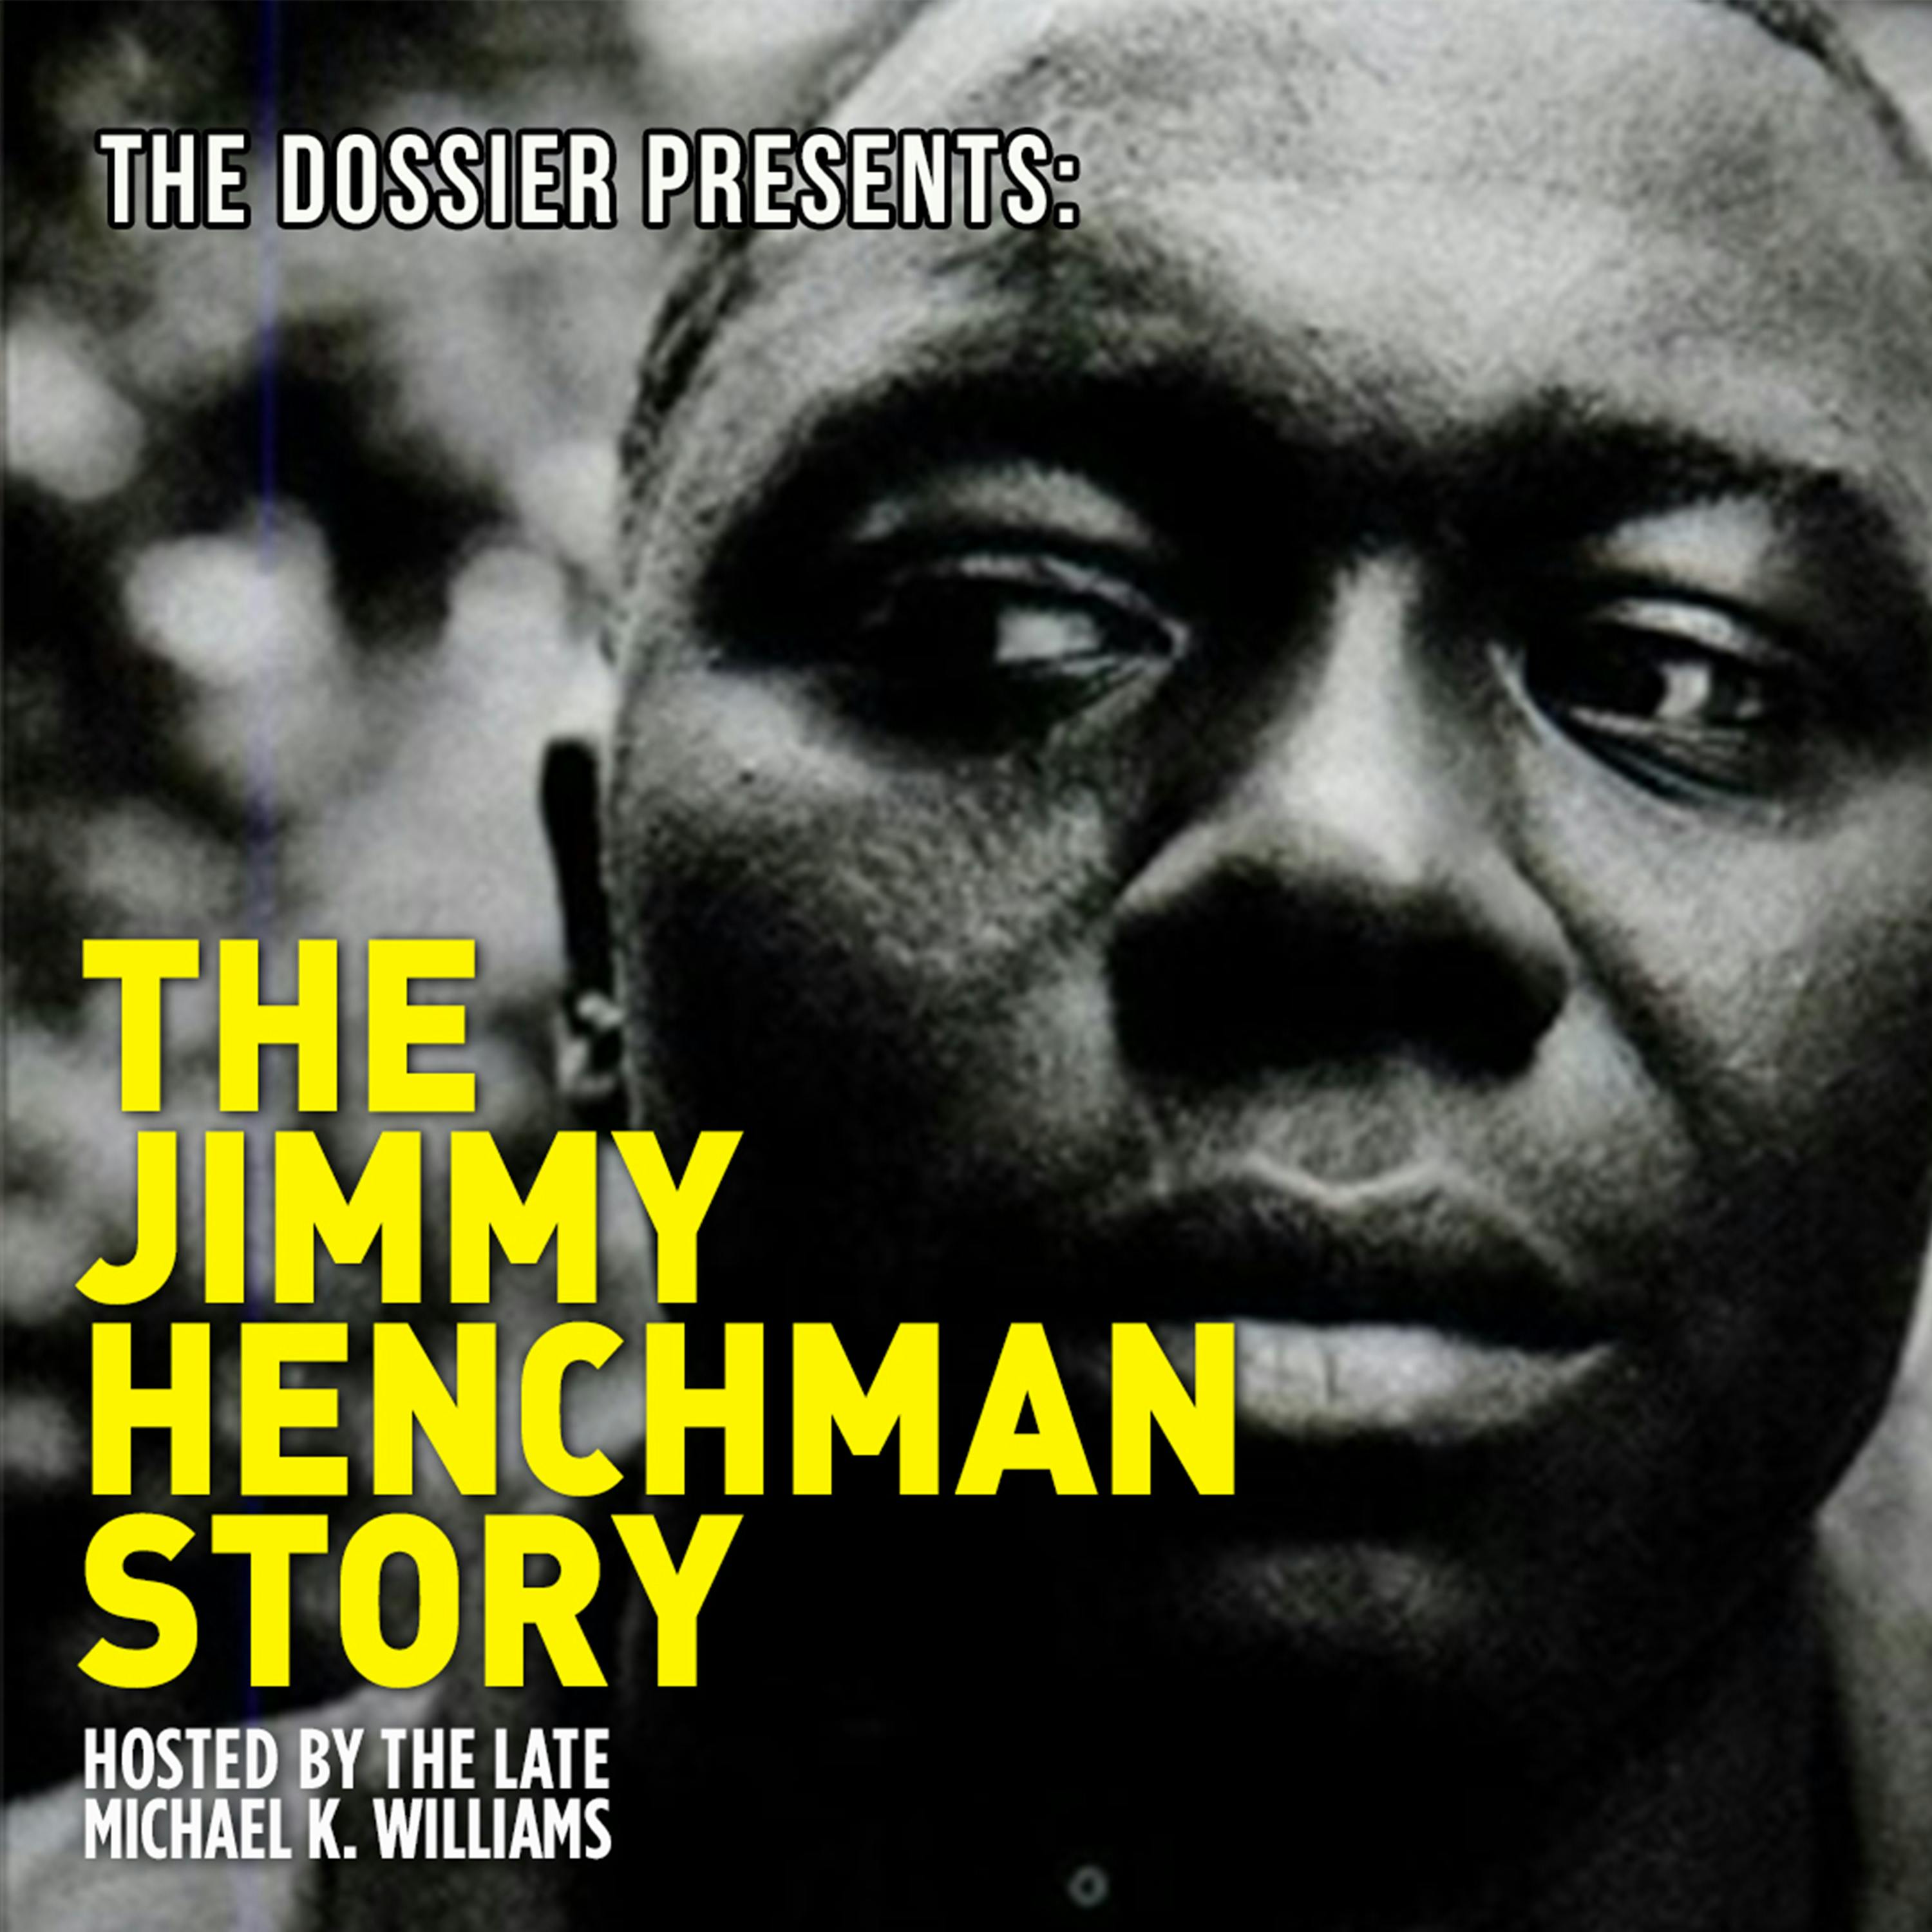 THE JIMMY HENCHMAN STORY - EP. 5 - TRIAL BY MEDIA